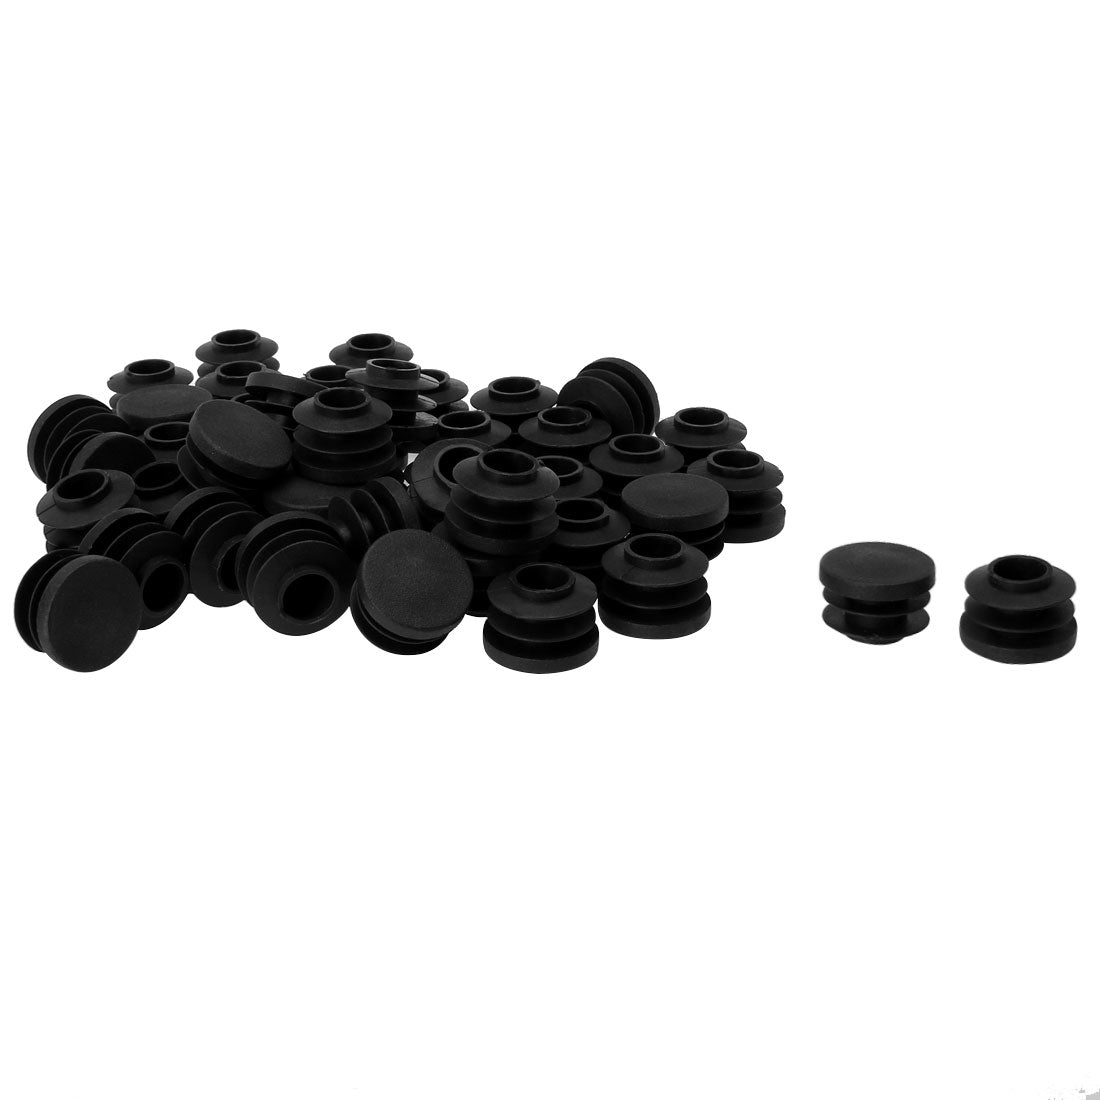 Uxcell Uxcell 3/4" 20mm OD Plastic Round Tube Ribbed Inserts End Cover Caps 45pcs, 0.67"-0.75" Inner Dia, Floor Furniture Chair Cabinet Protector